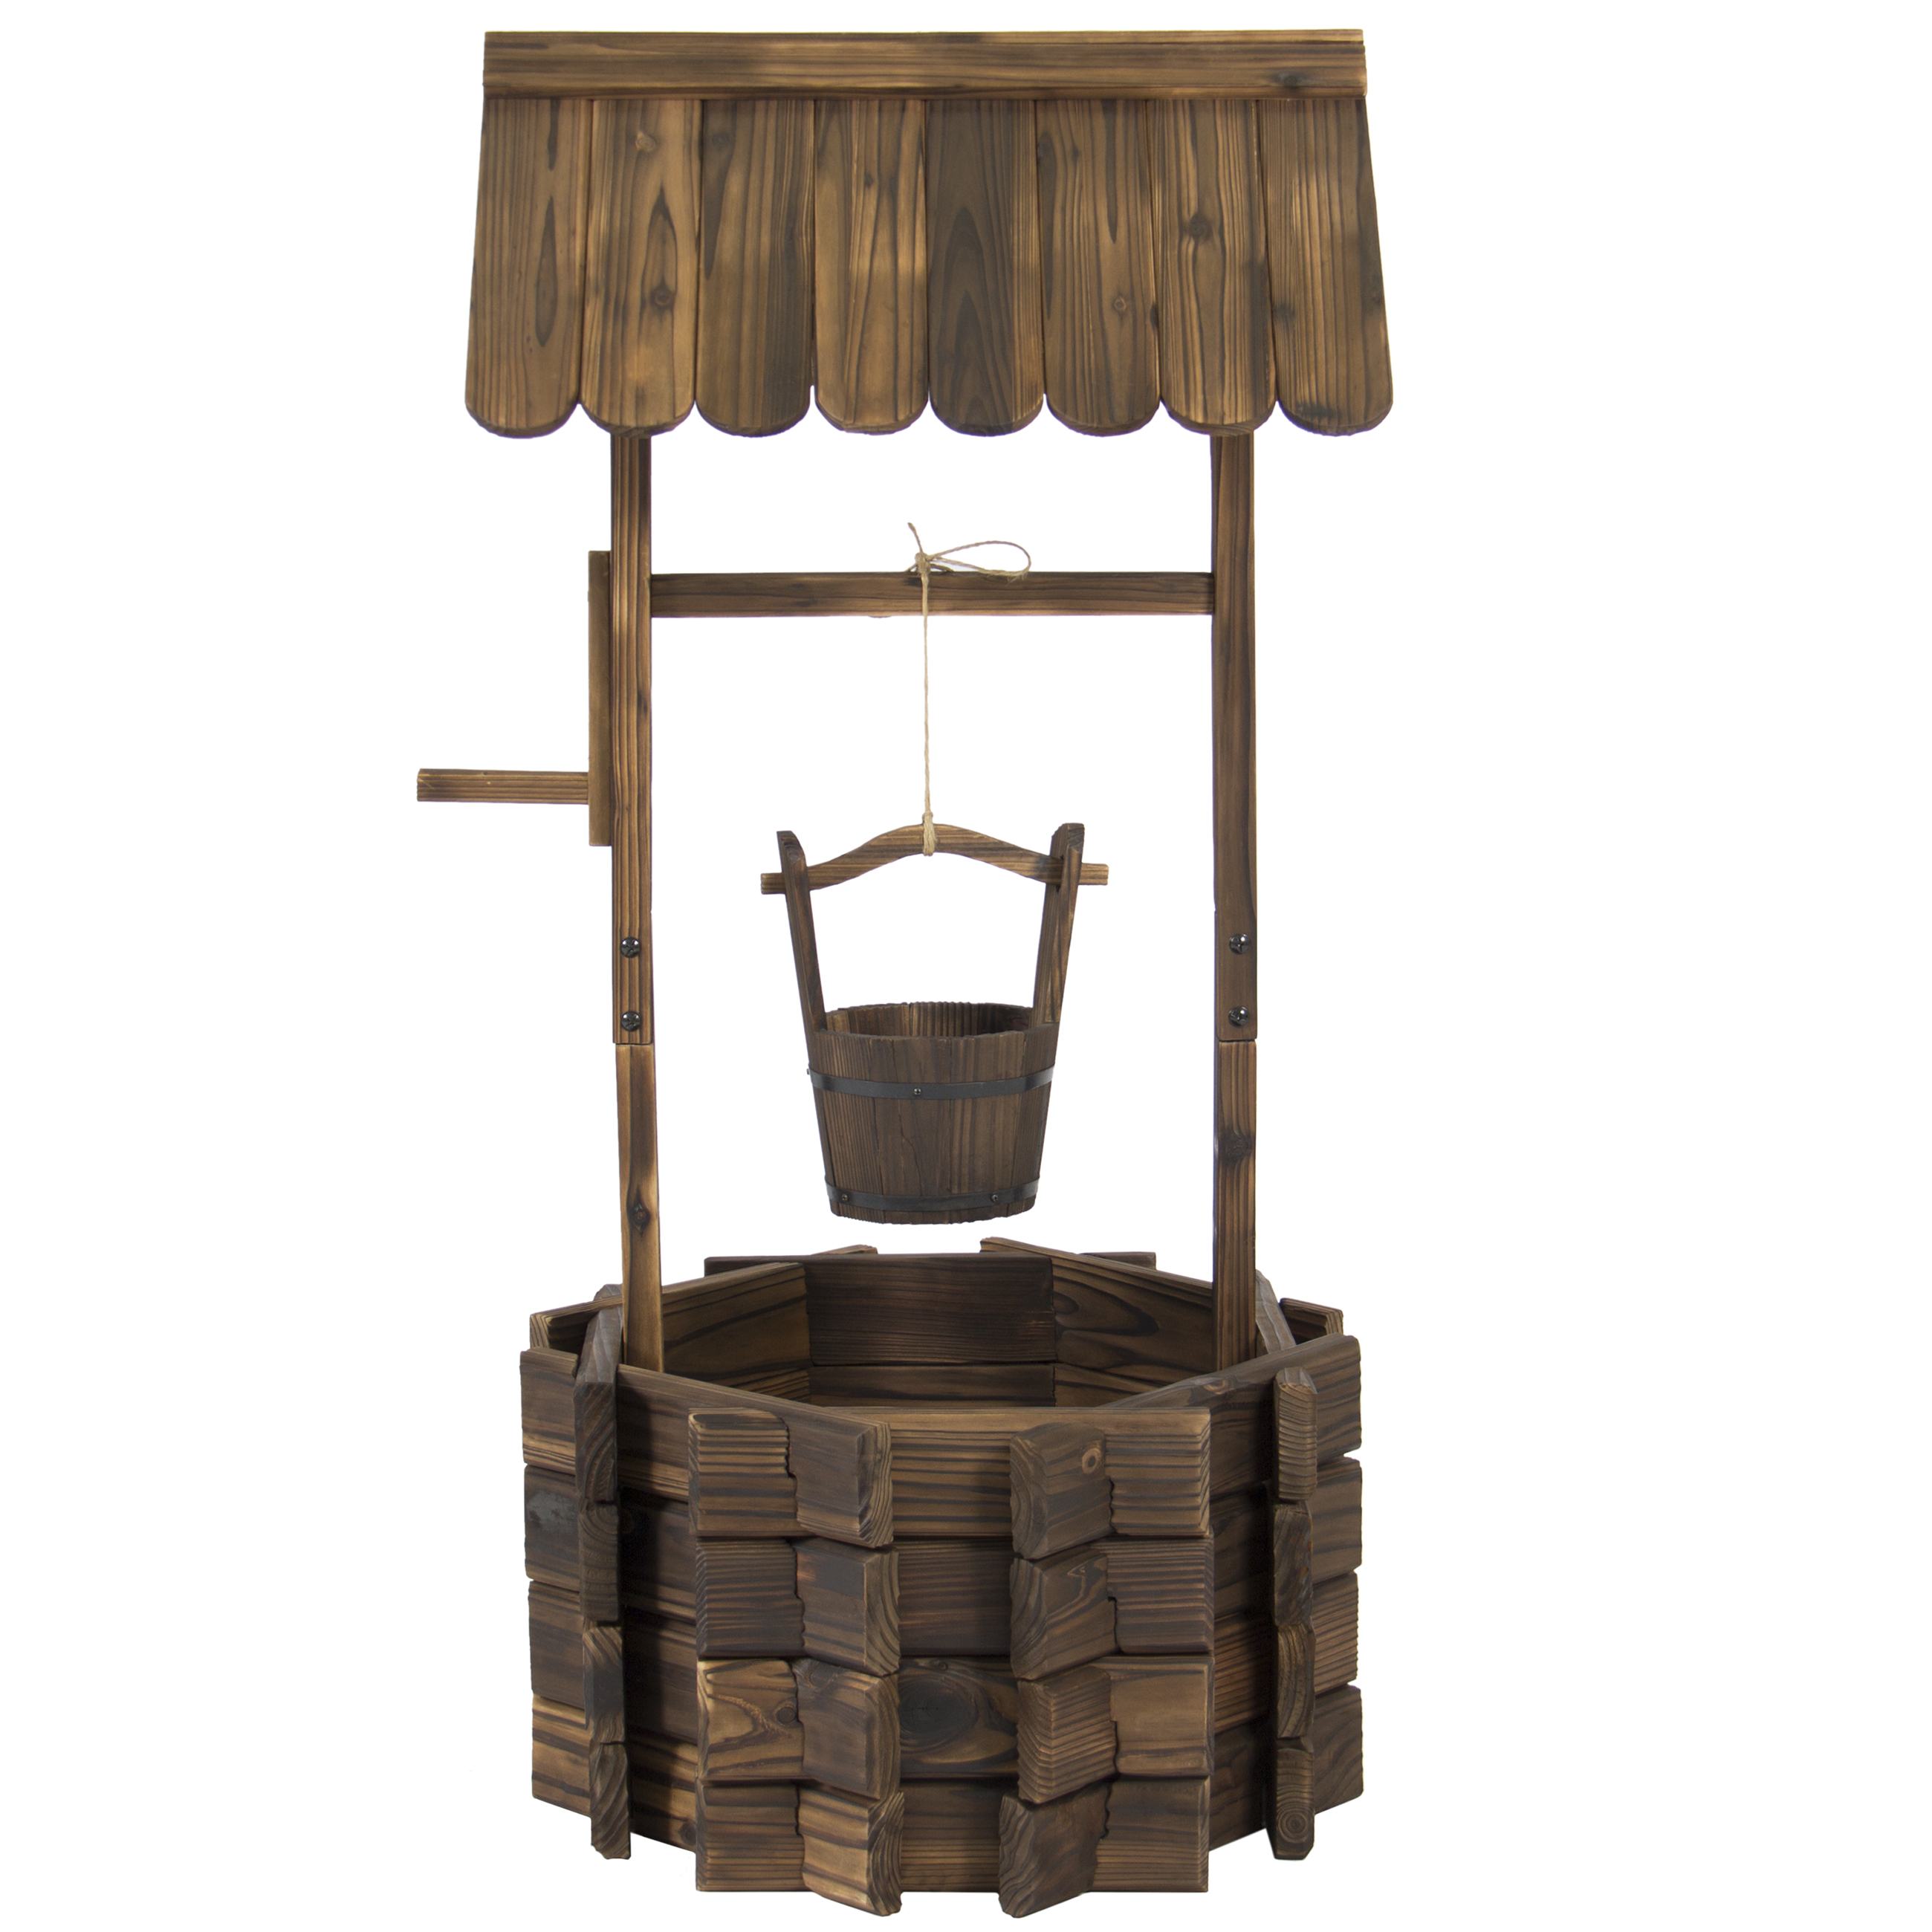 Best Choice Products Wooden Wishing Well Bucket Flower Planter Patio ...